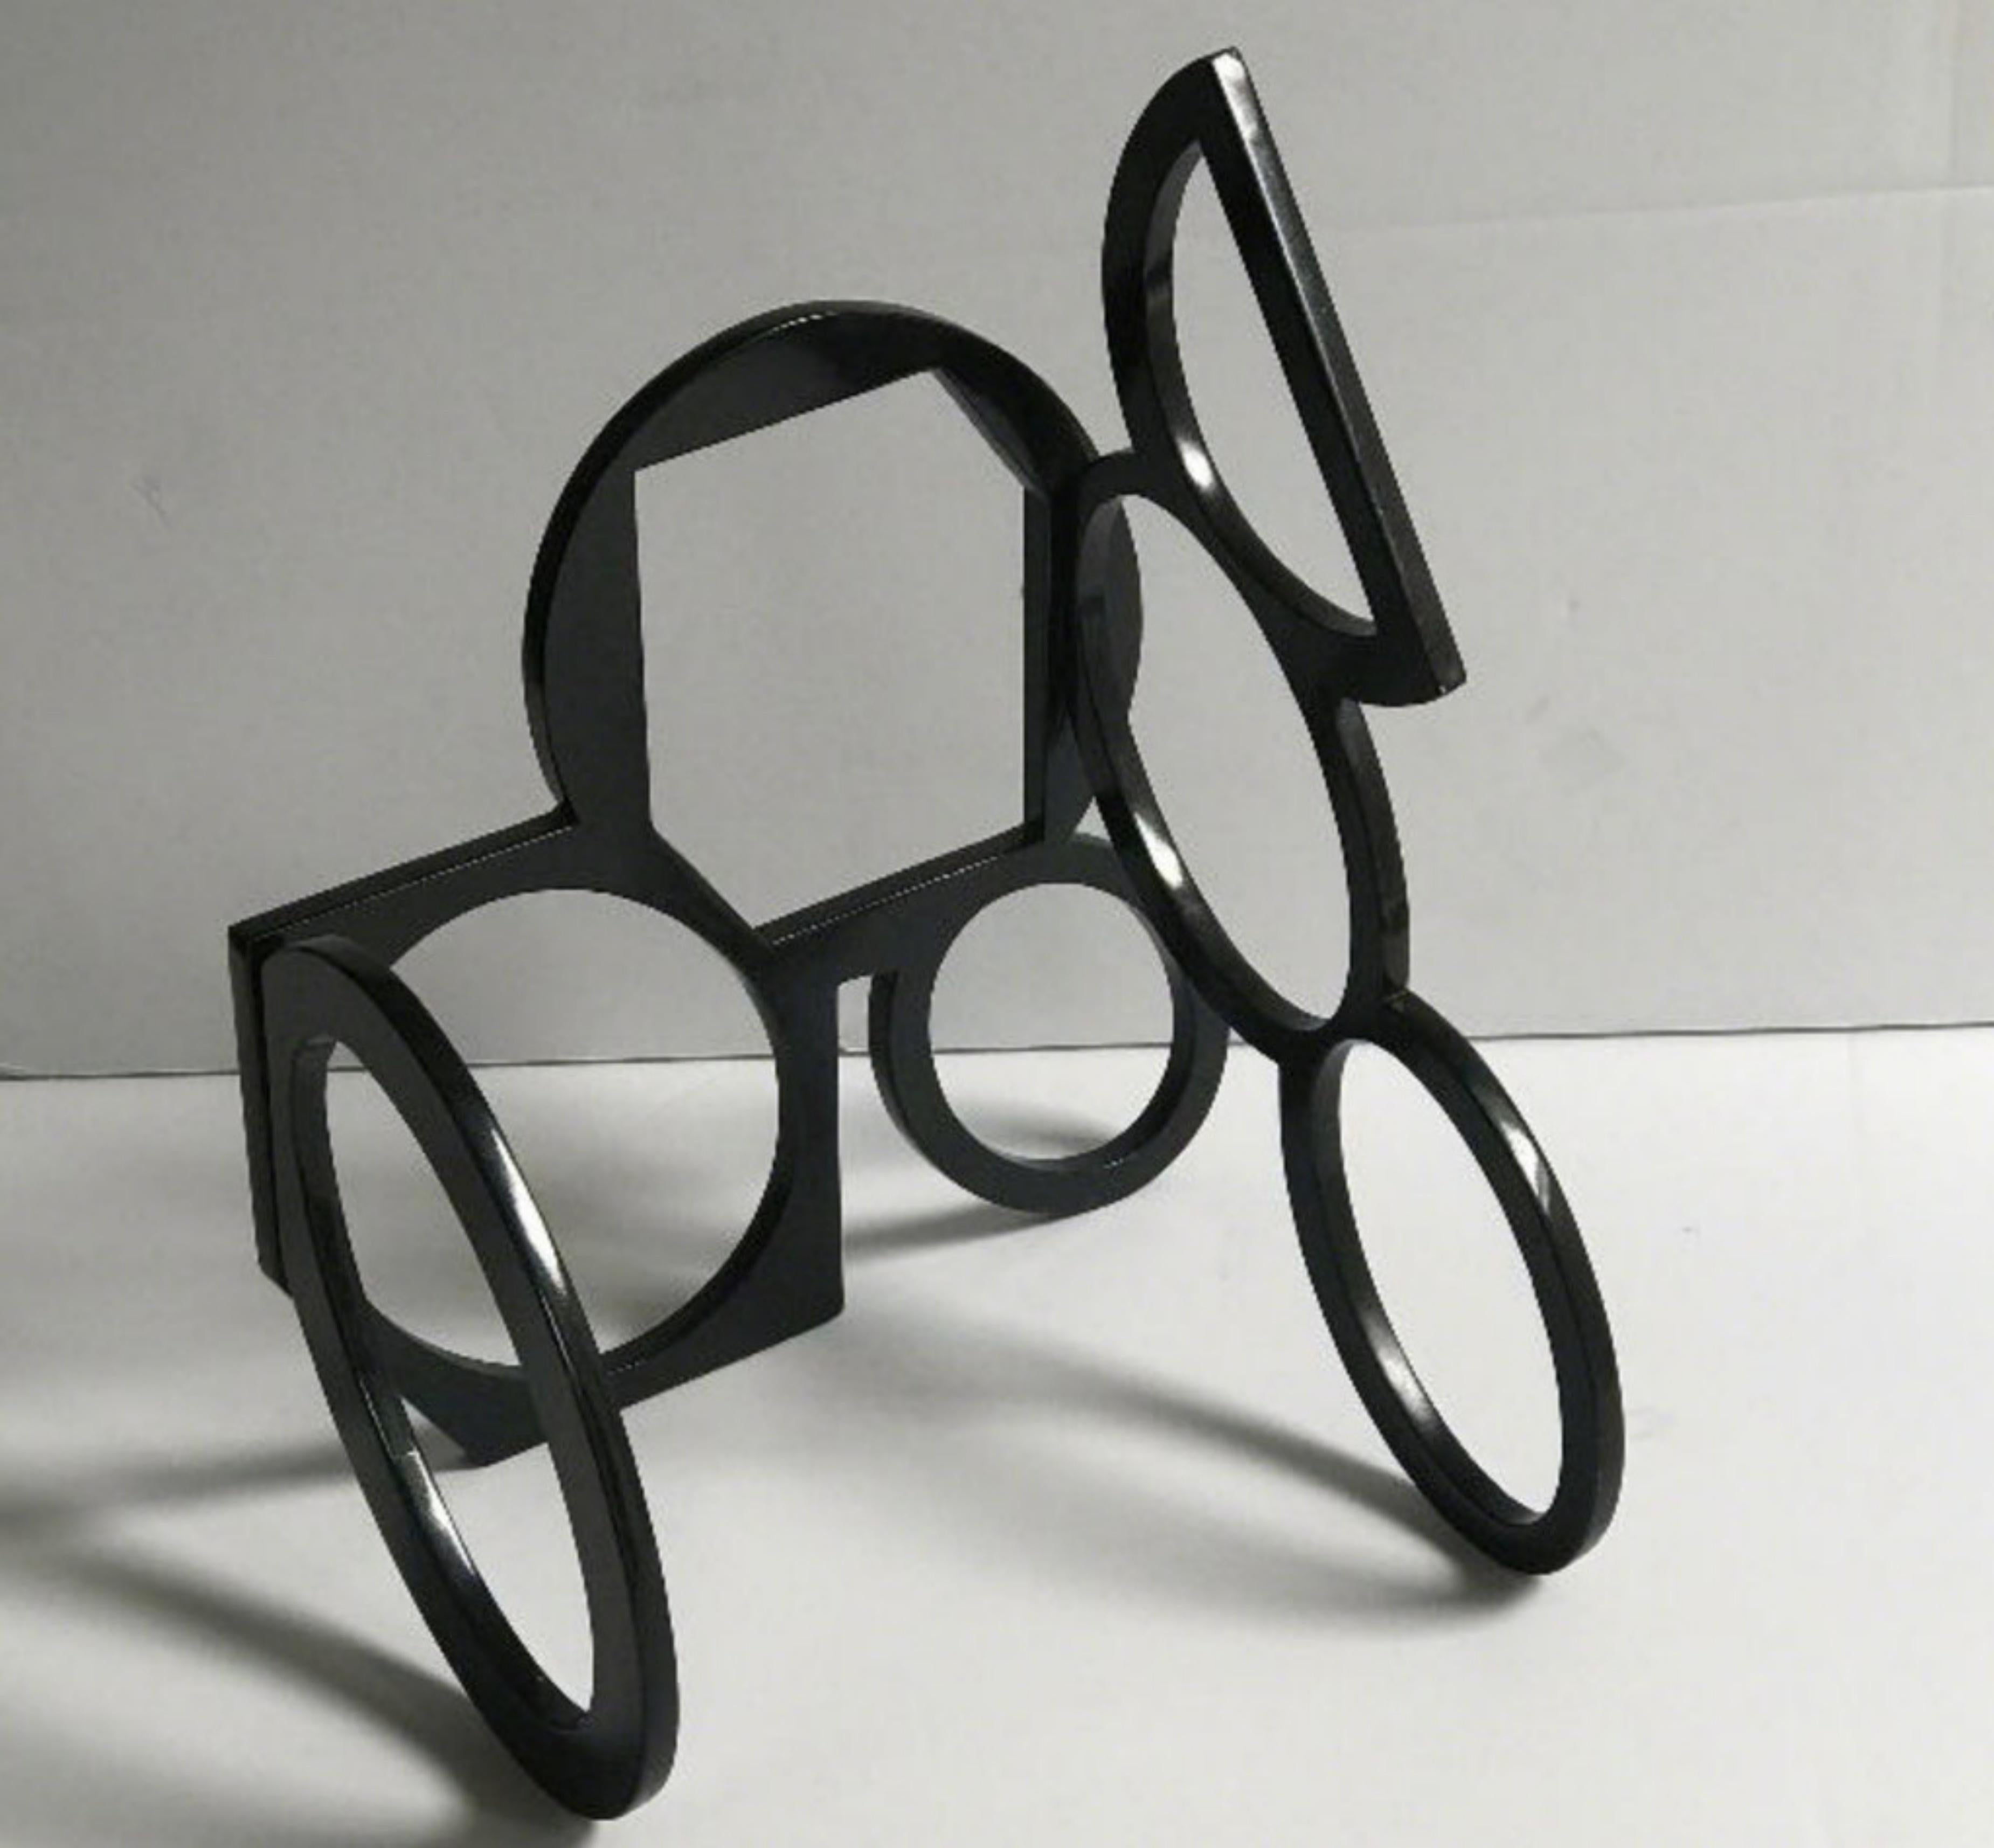 Nigel HALL Abstract Sculpture - Rydbo Maquette, 1989-2000